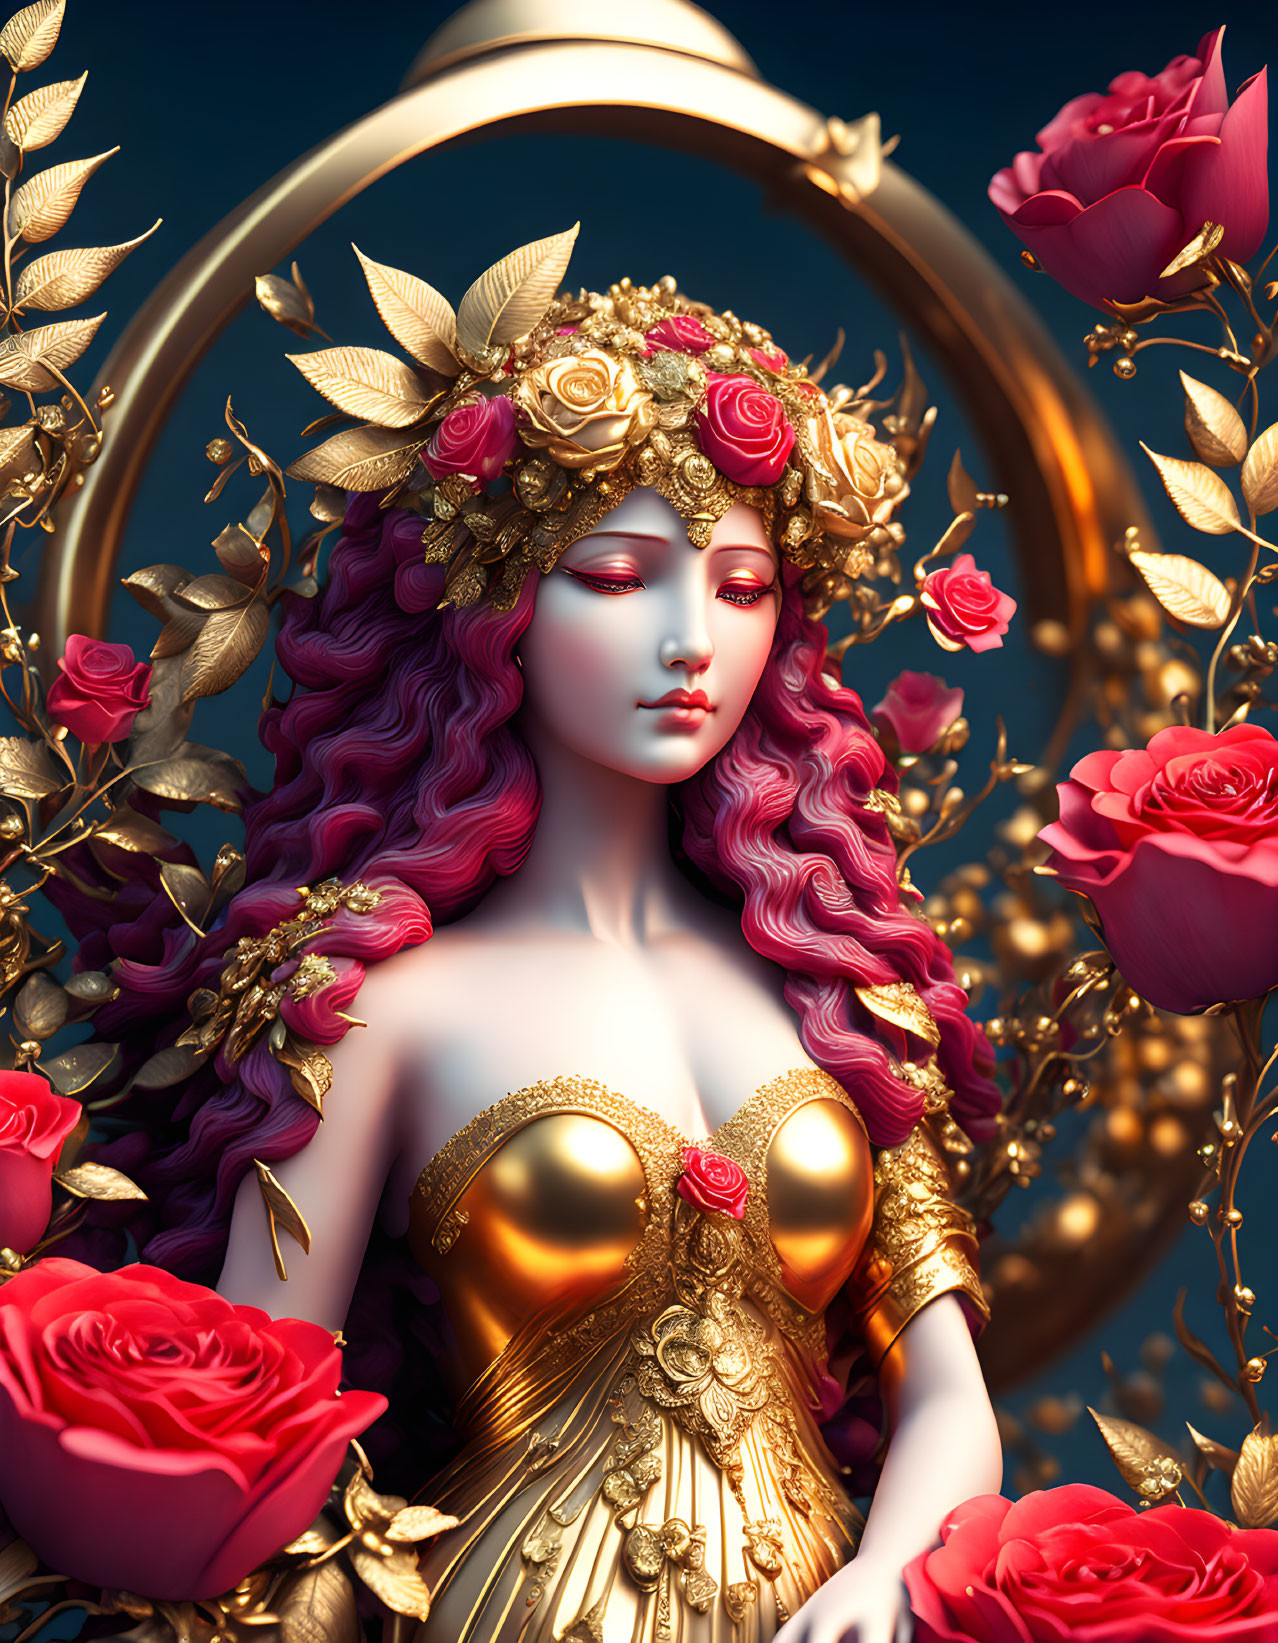 Stylized 3D-rendered woman with pink hair in gold floral crown, surrounded by red